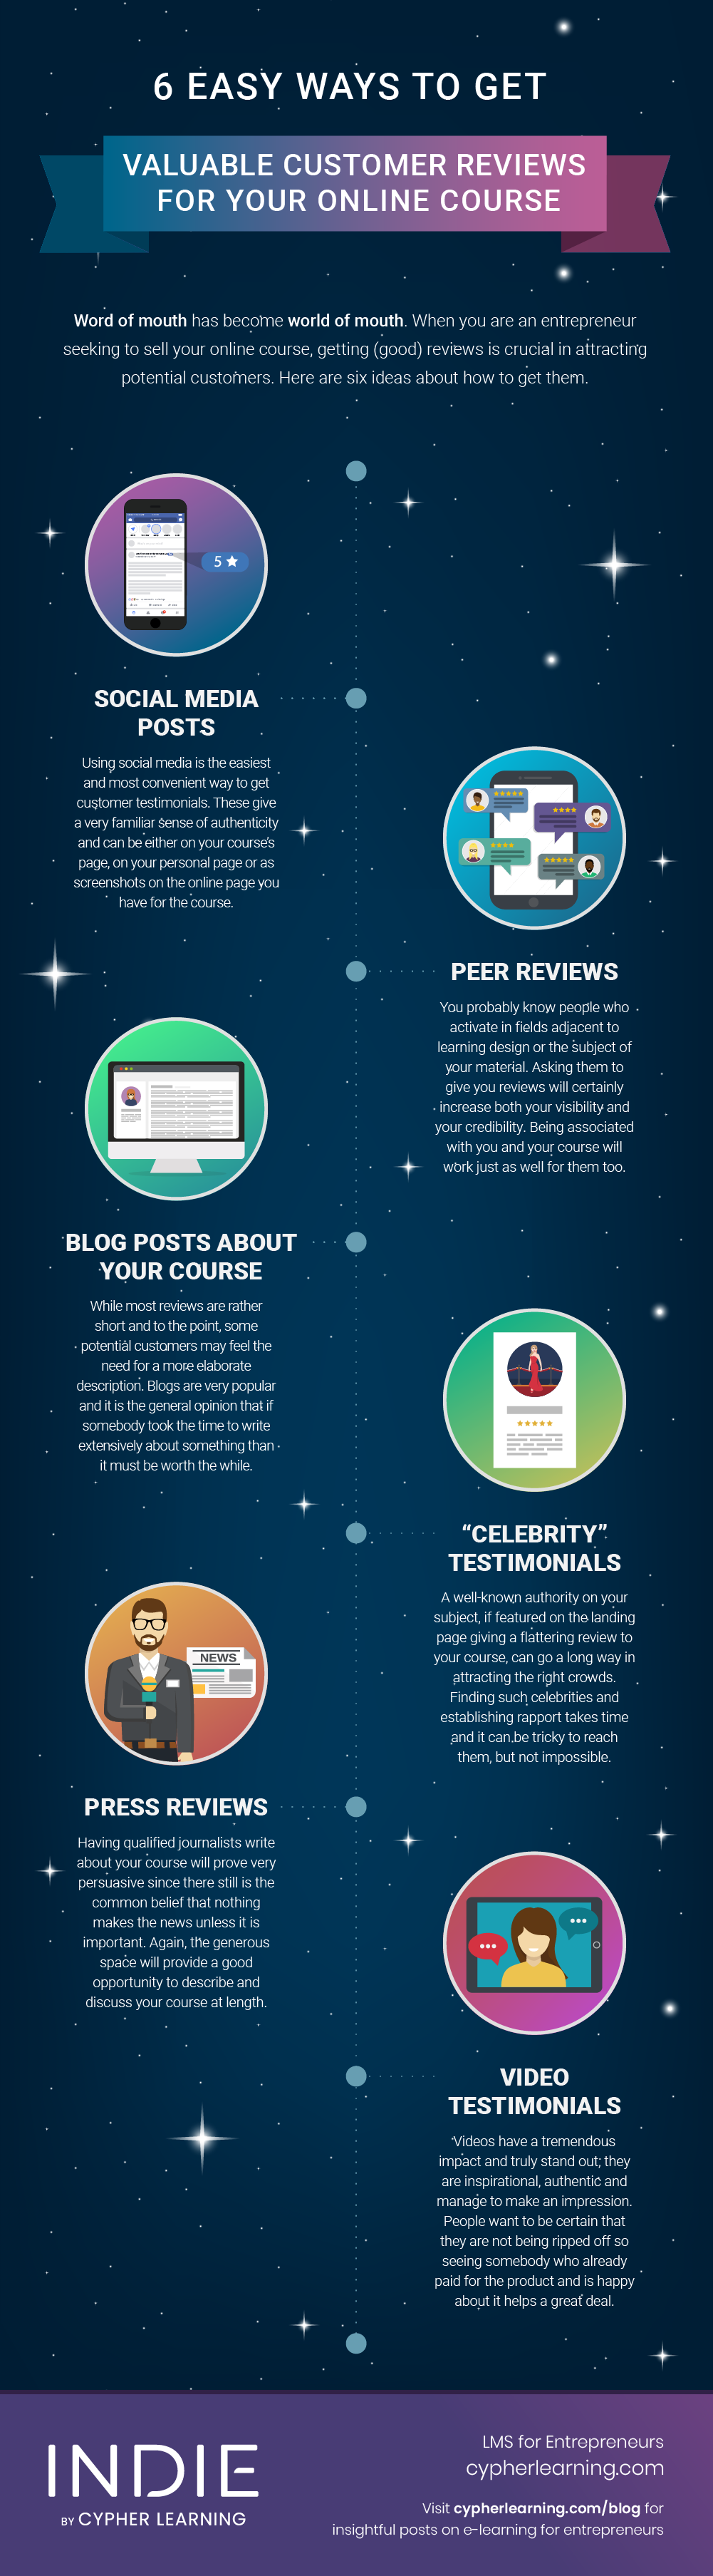 6-easy-ways-to-get-valuable-customer-reviews-for-your-online-course infographic | Entrepreneurs Blog